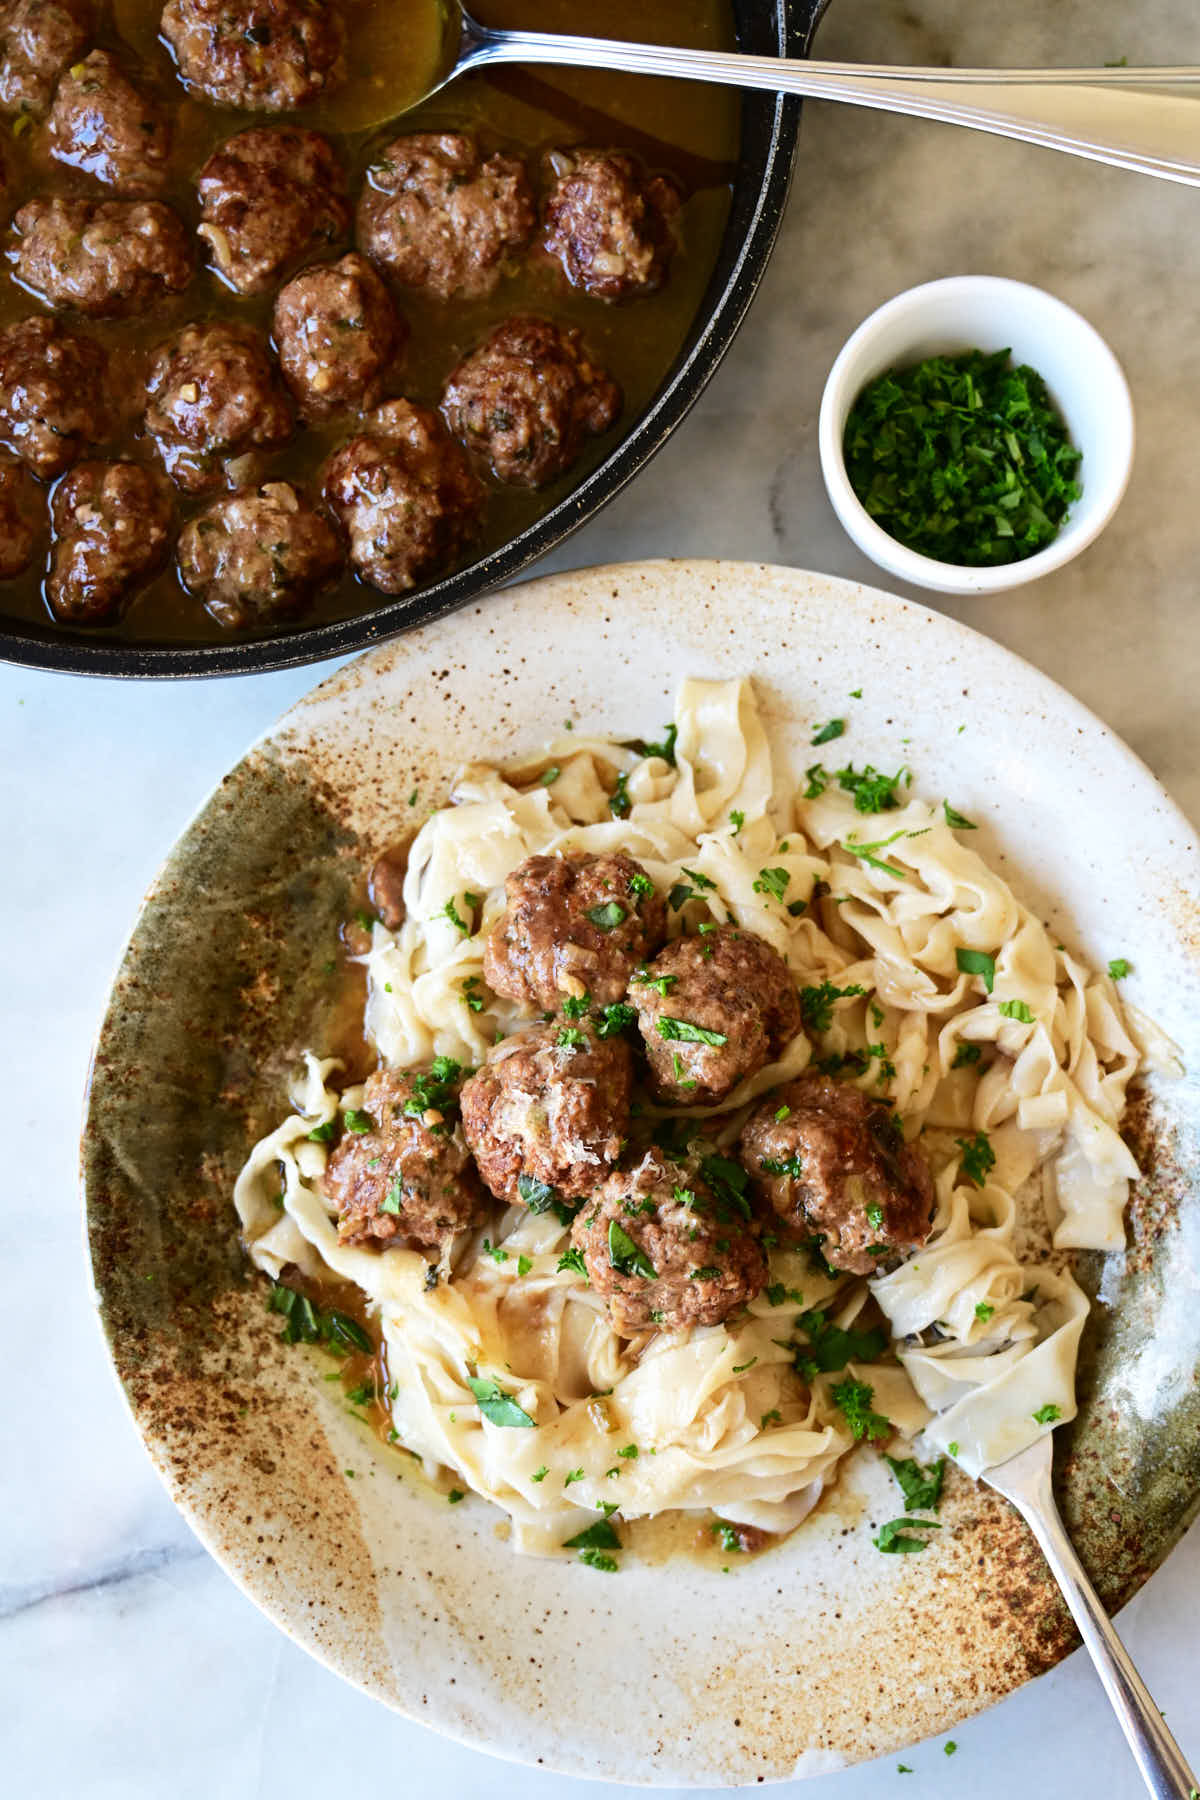 Beef meatballs made with fresh herbs and caramelized onions.